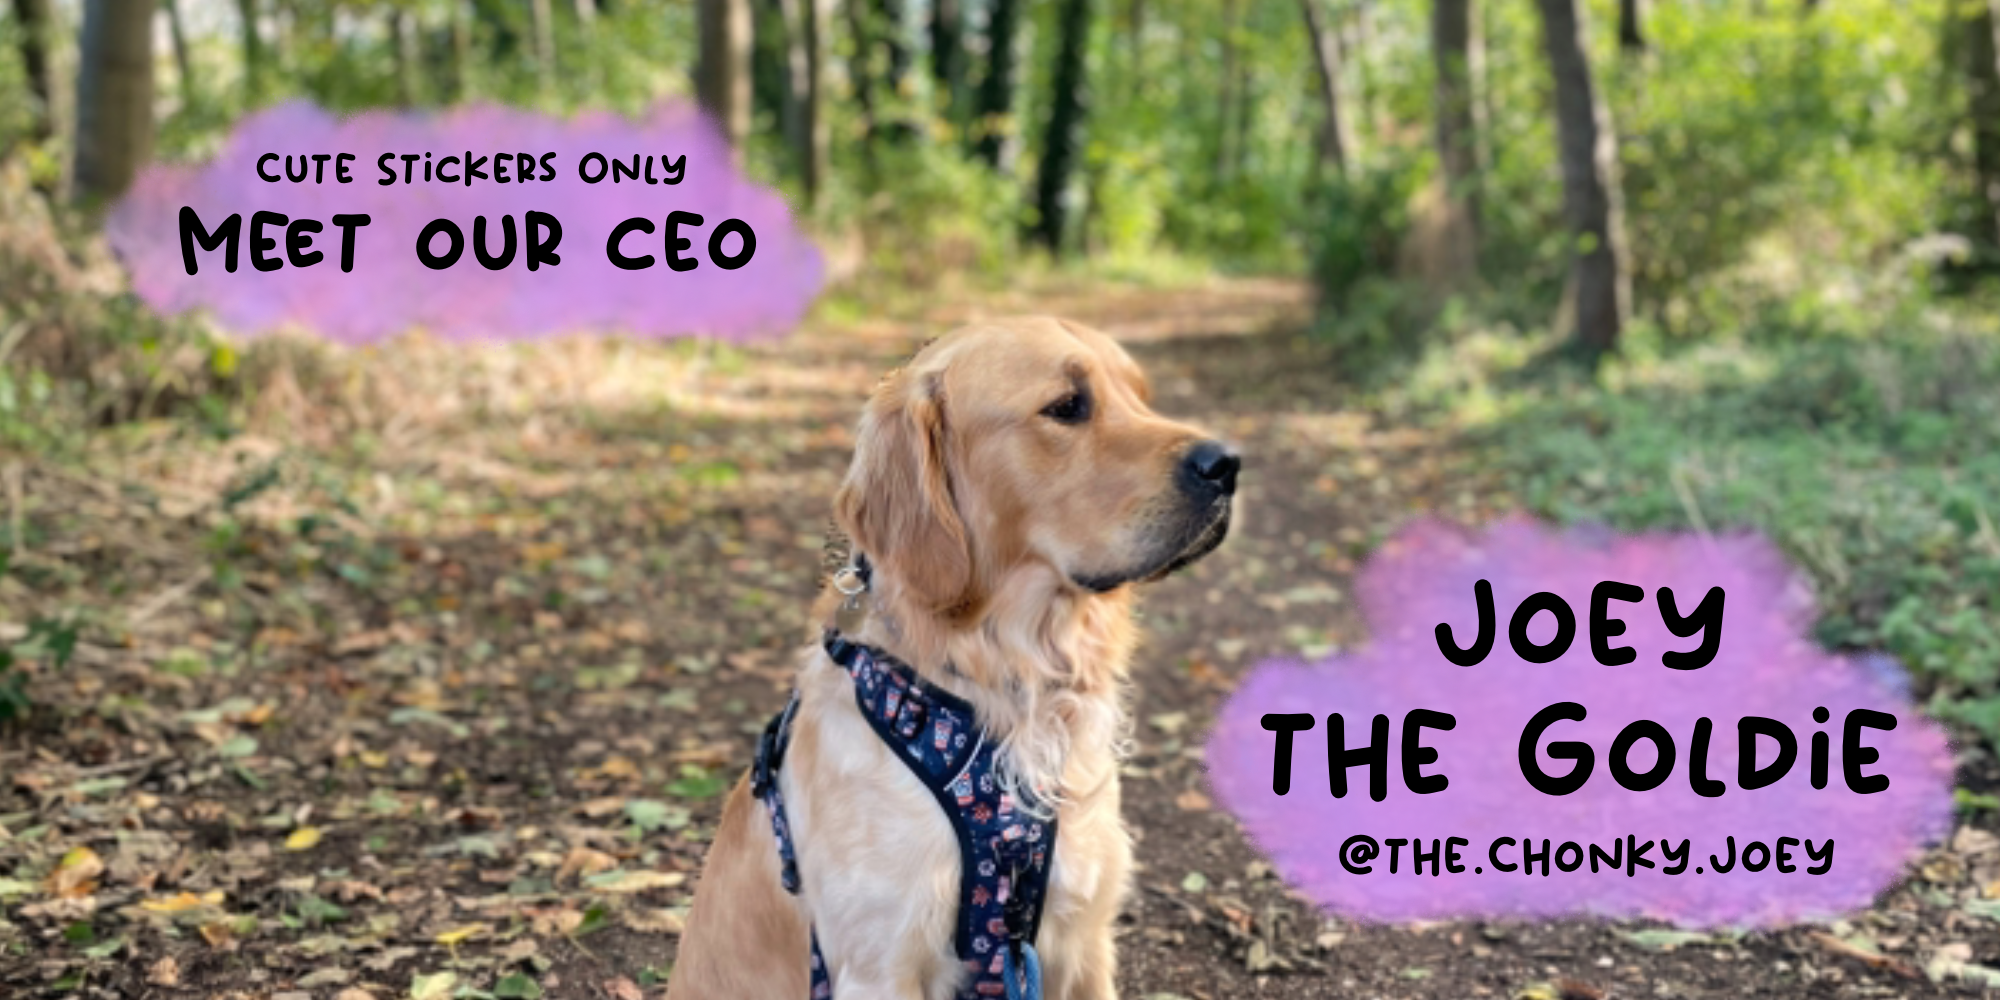 Meet our CEO, Joey the Goldie